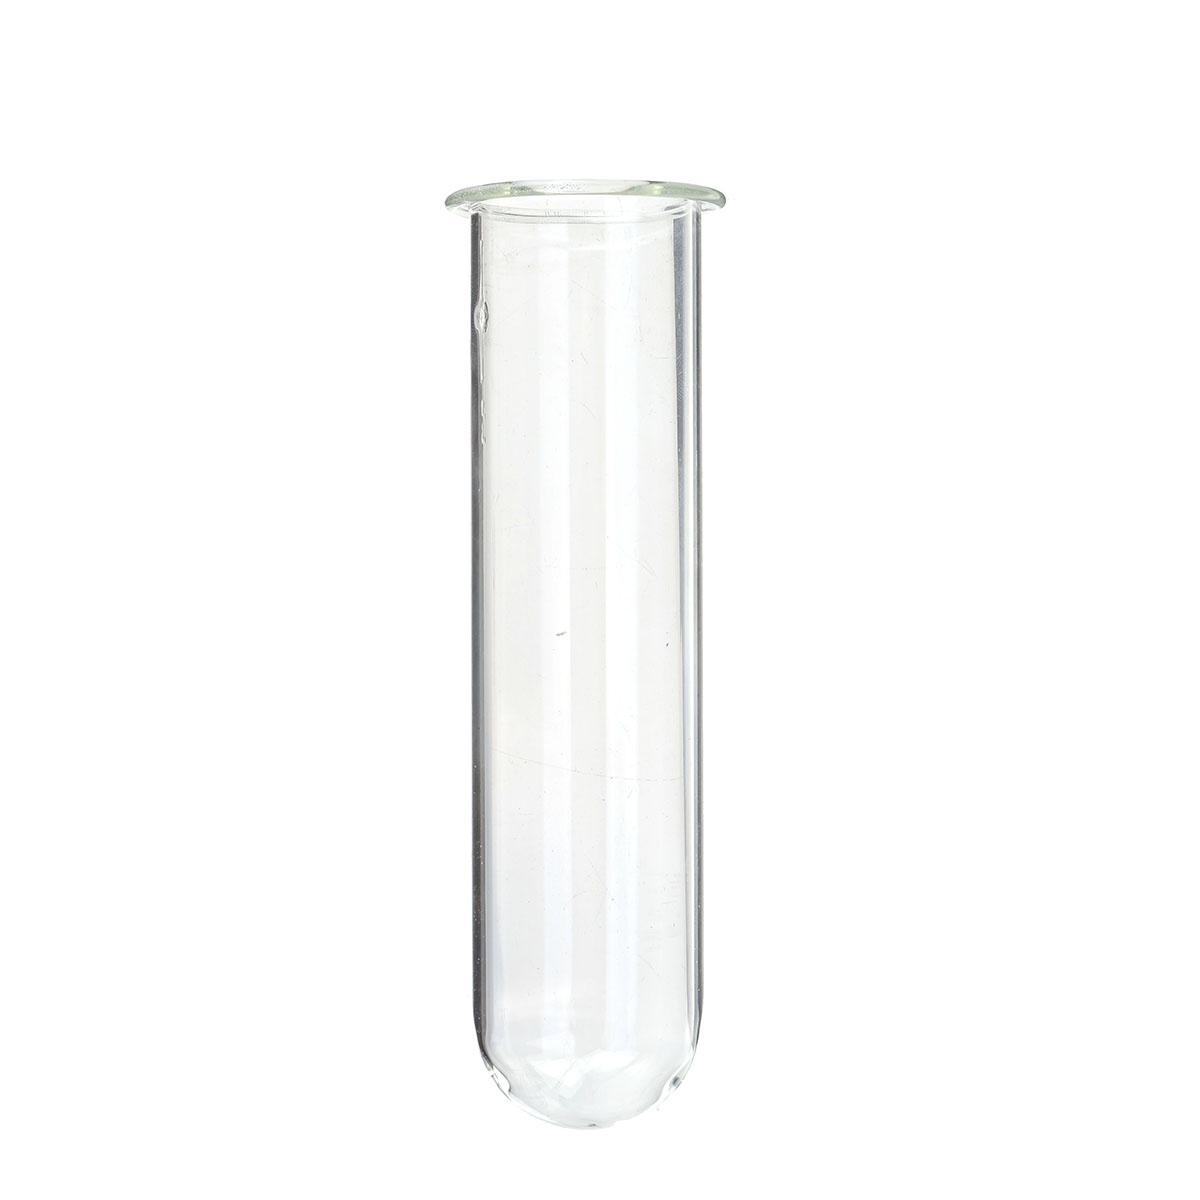 Creative-Hanging-Test-Tube-Glass-Vase-Hydroponic-Flower-Container--Base-Holder-1530229